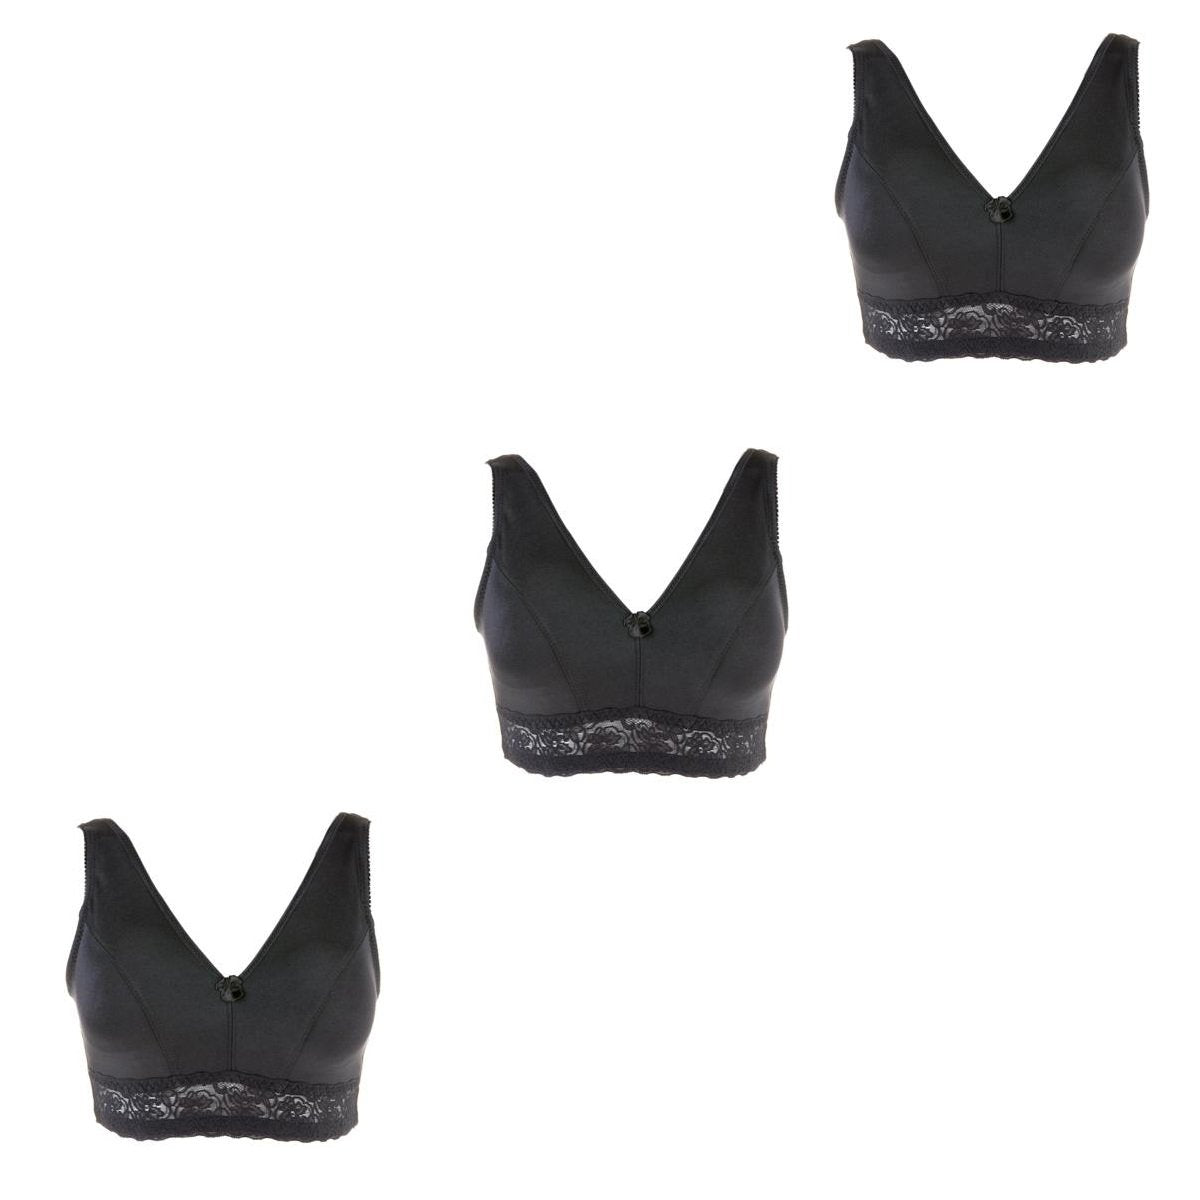 Rhonda Shear 3-pack Pin Up Smooth Bra with Removable Pads – goSASS